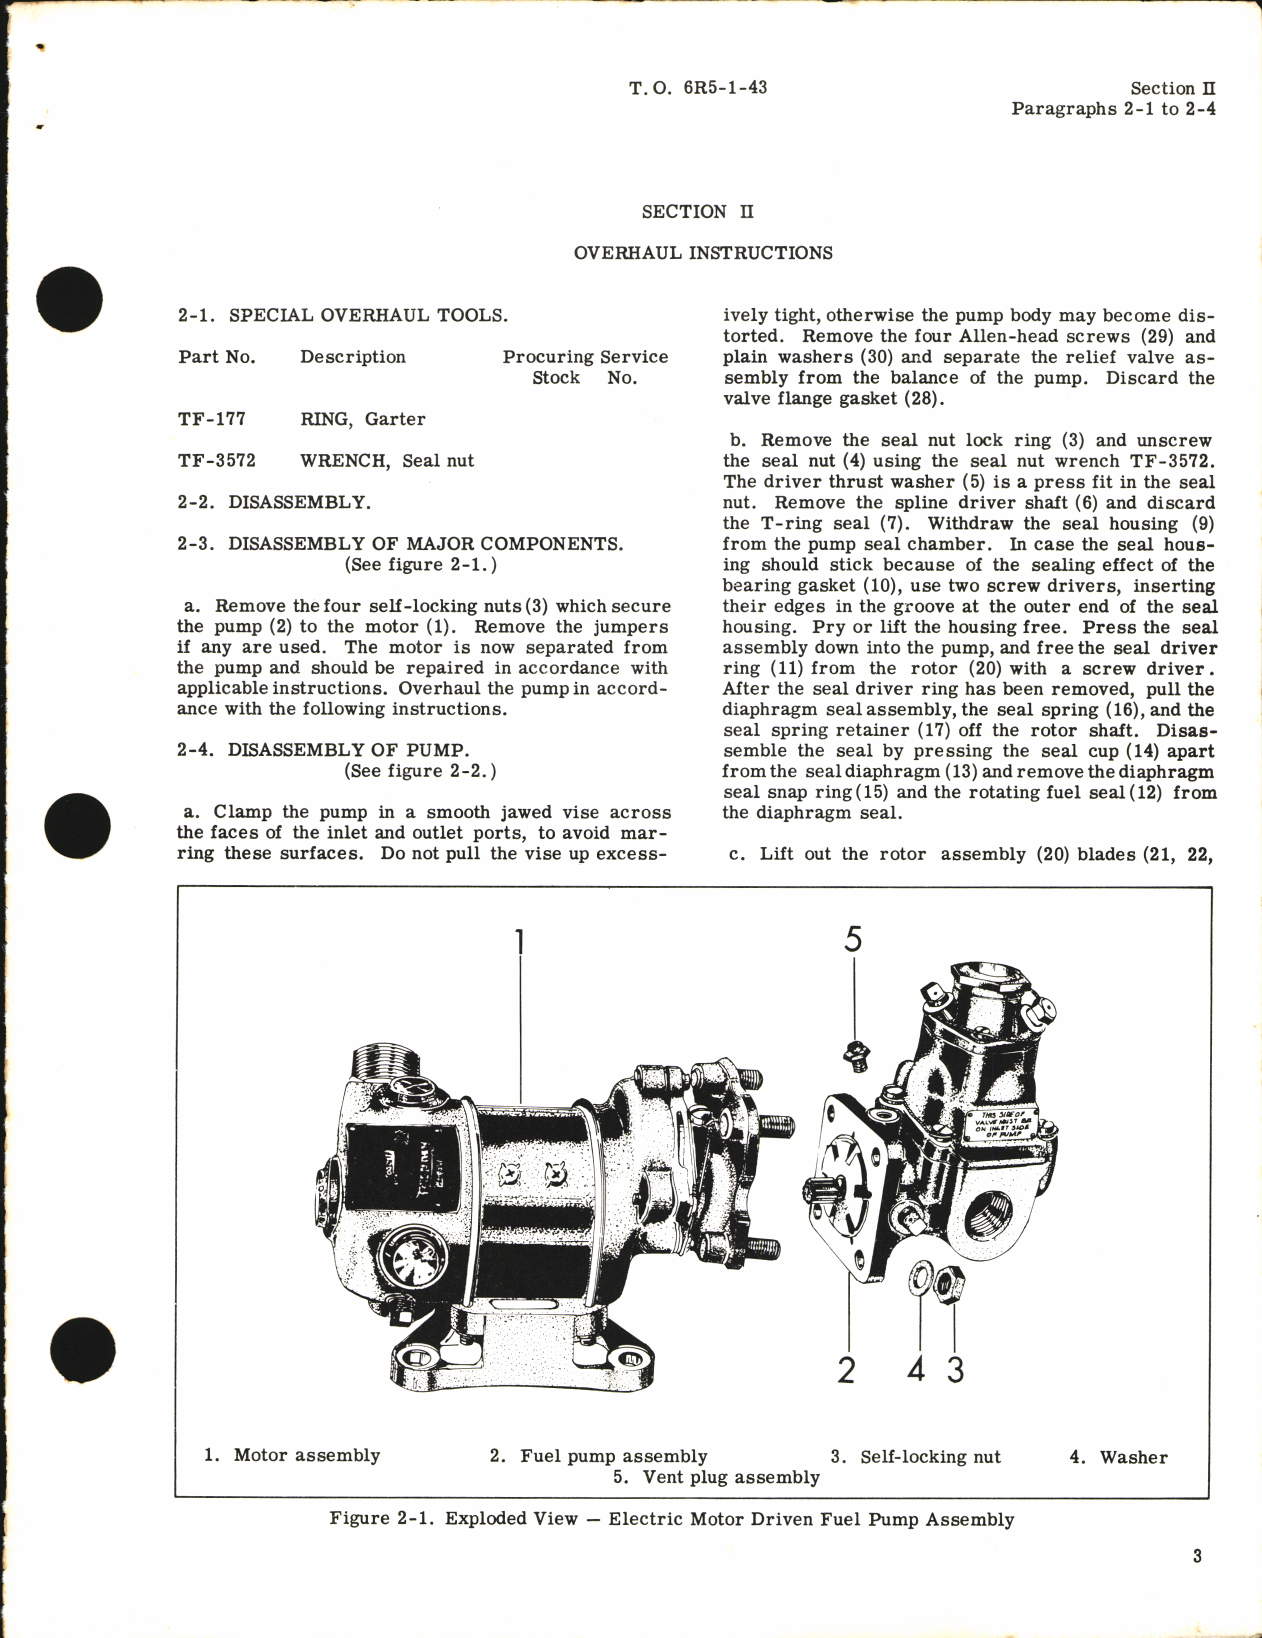 Sample page 5 from AirCorps Library document: Overhaul Instructions for Engine-Driven and Electric Motor-Driven Fuel Pump